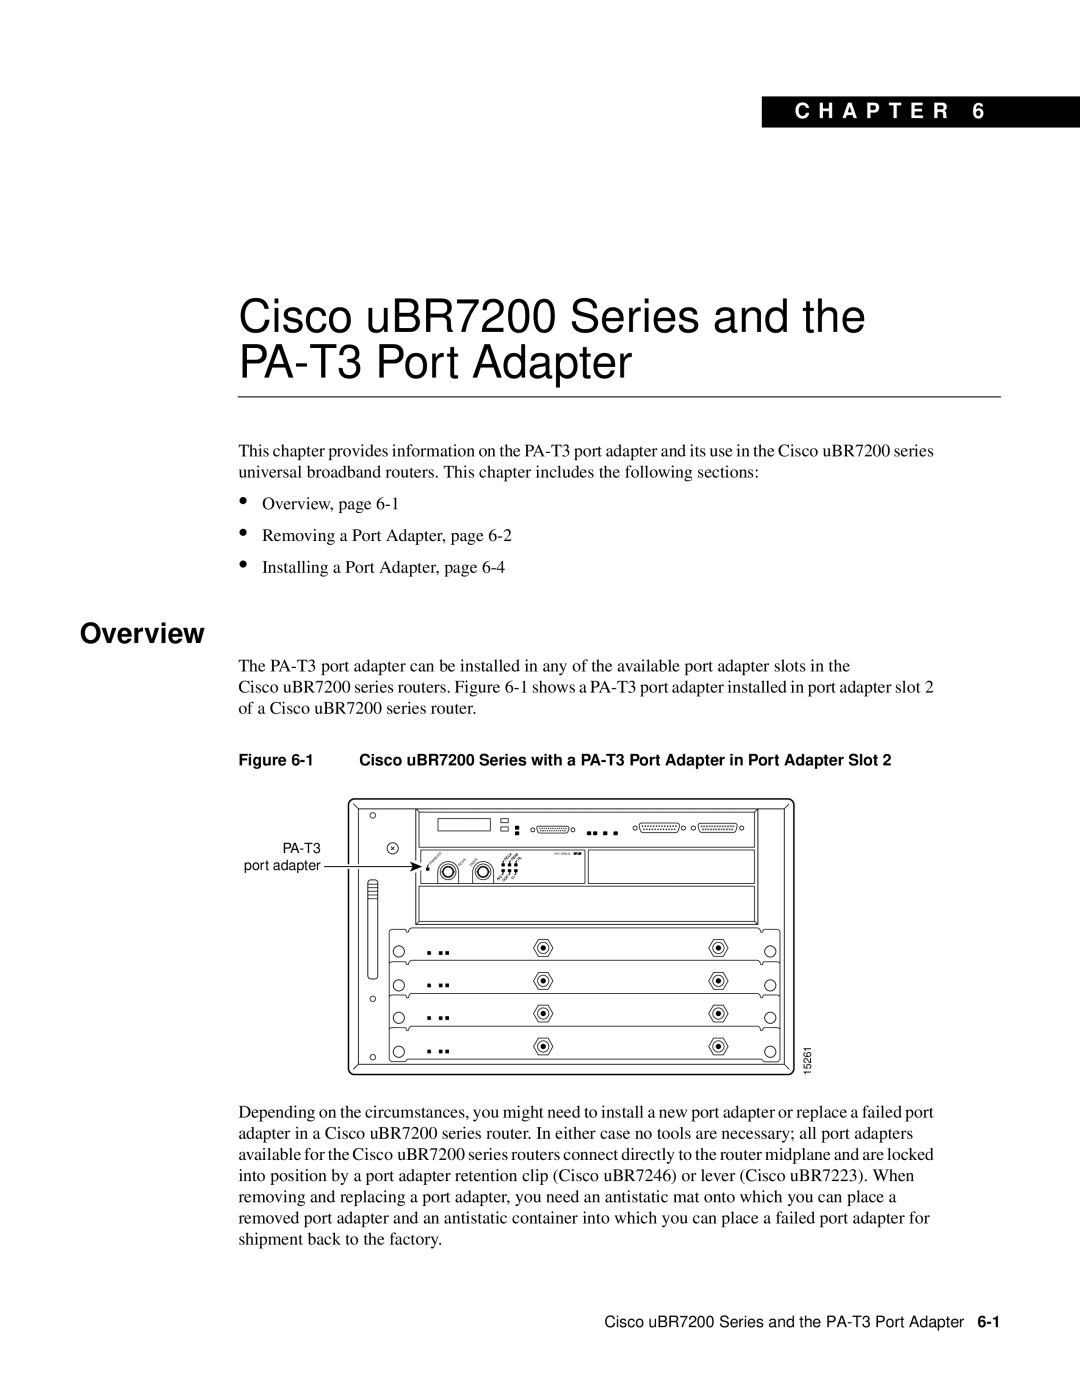 Cisco Systems manual Cisco uBR7200 Series and the PA-T3 Port Adapter, Overview, C H A P T E R 